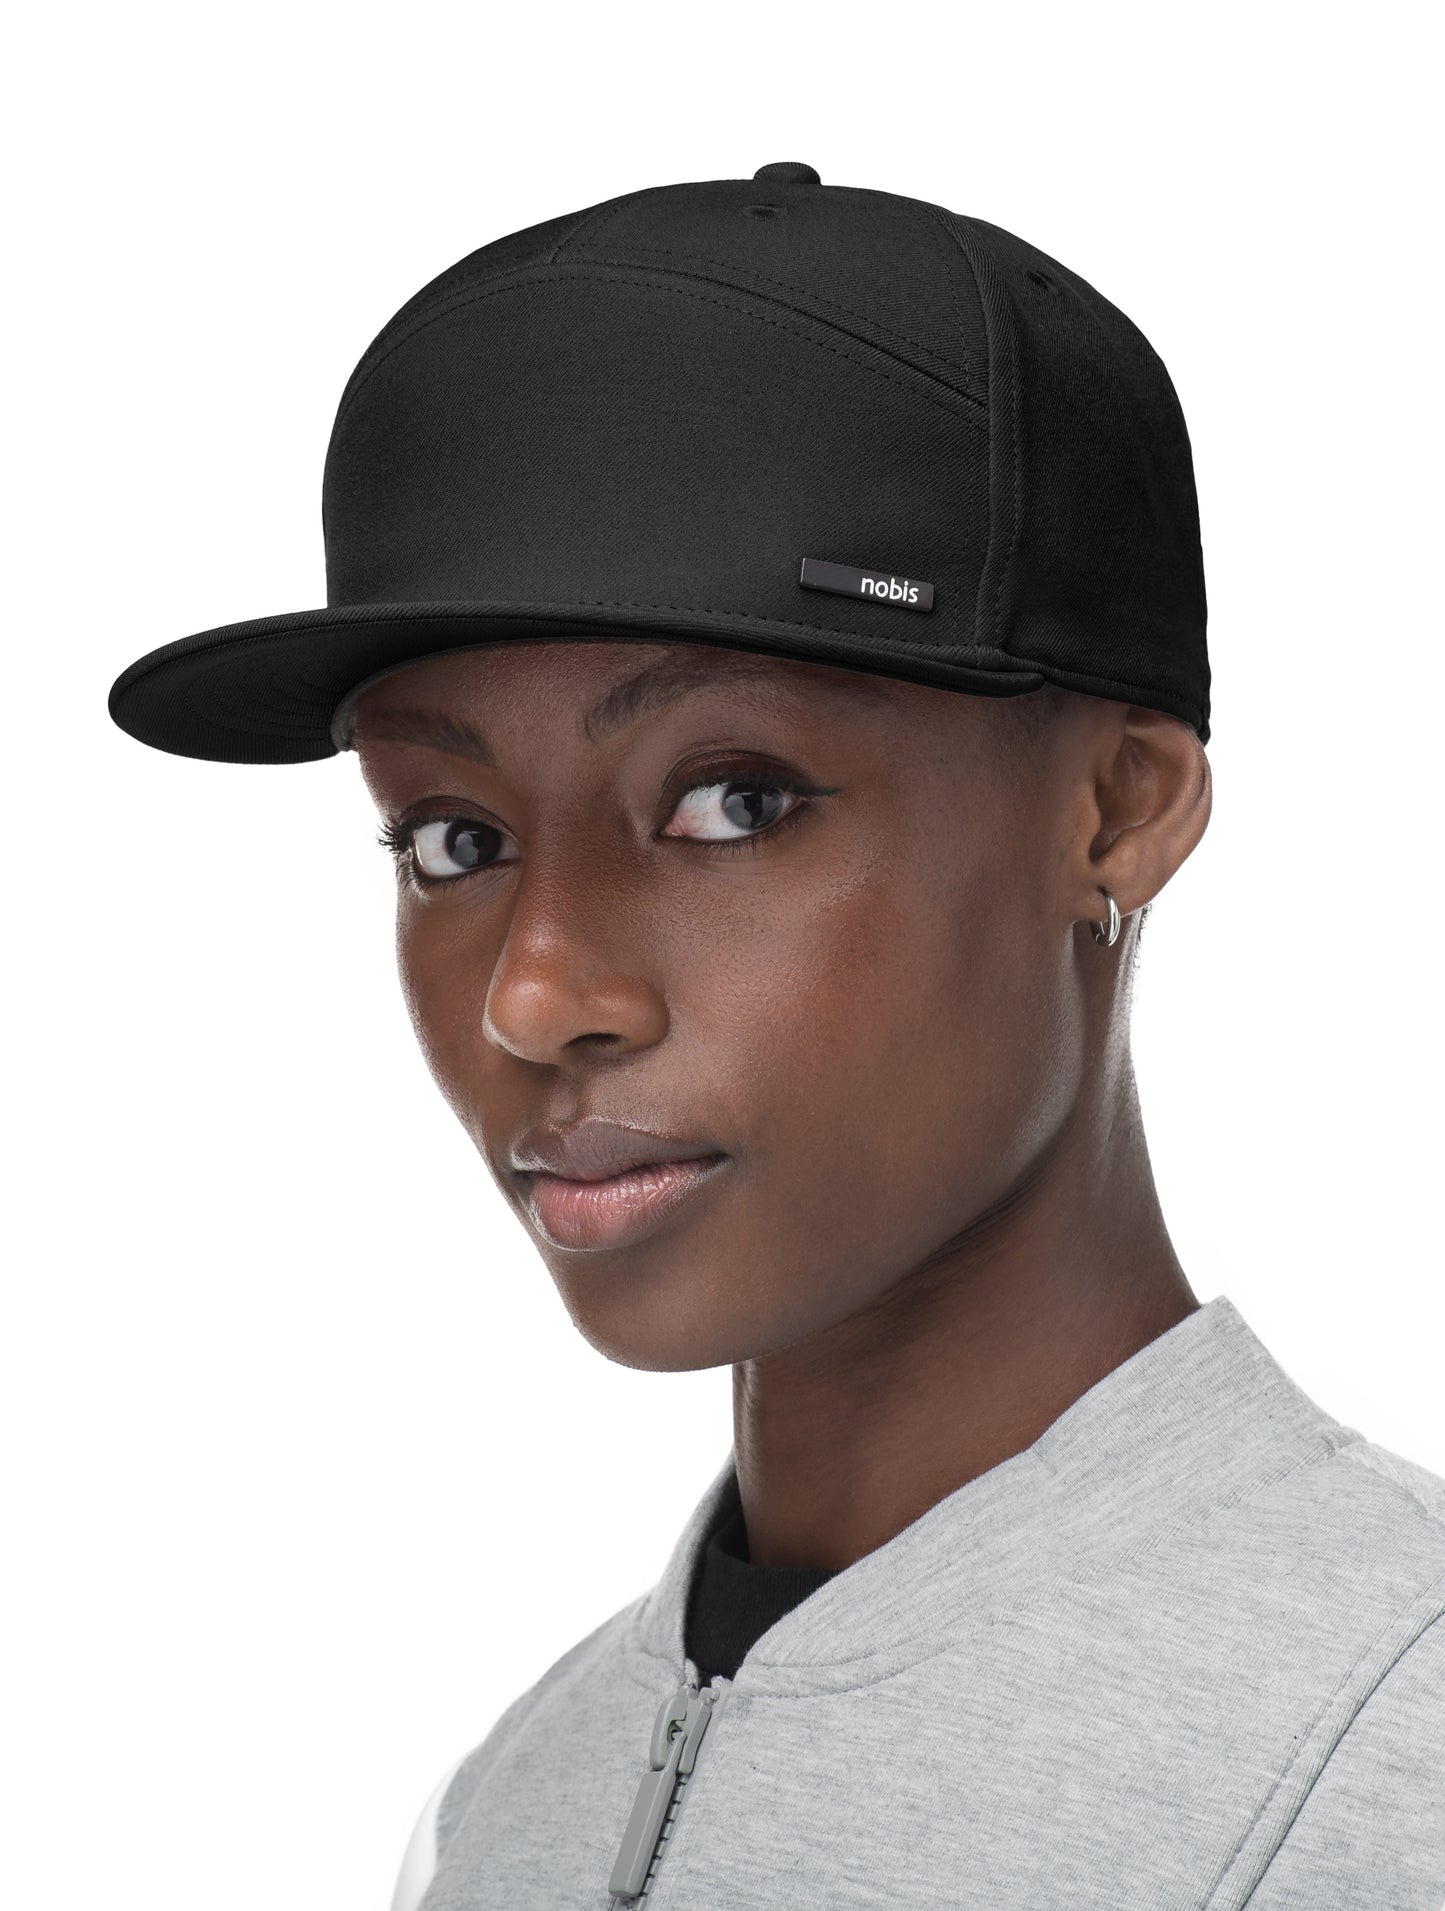 Unisex 7-panel snapback hat with flat brim and structured crown in Black